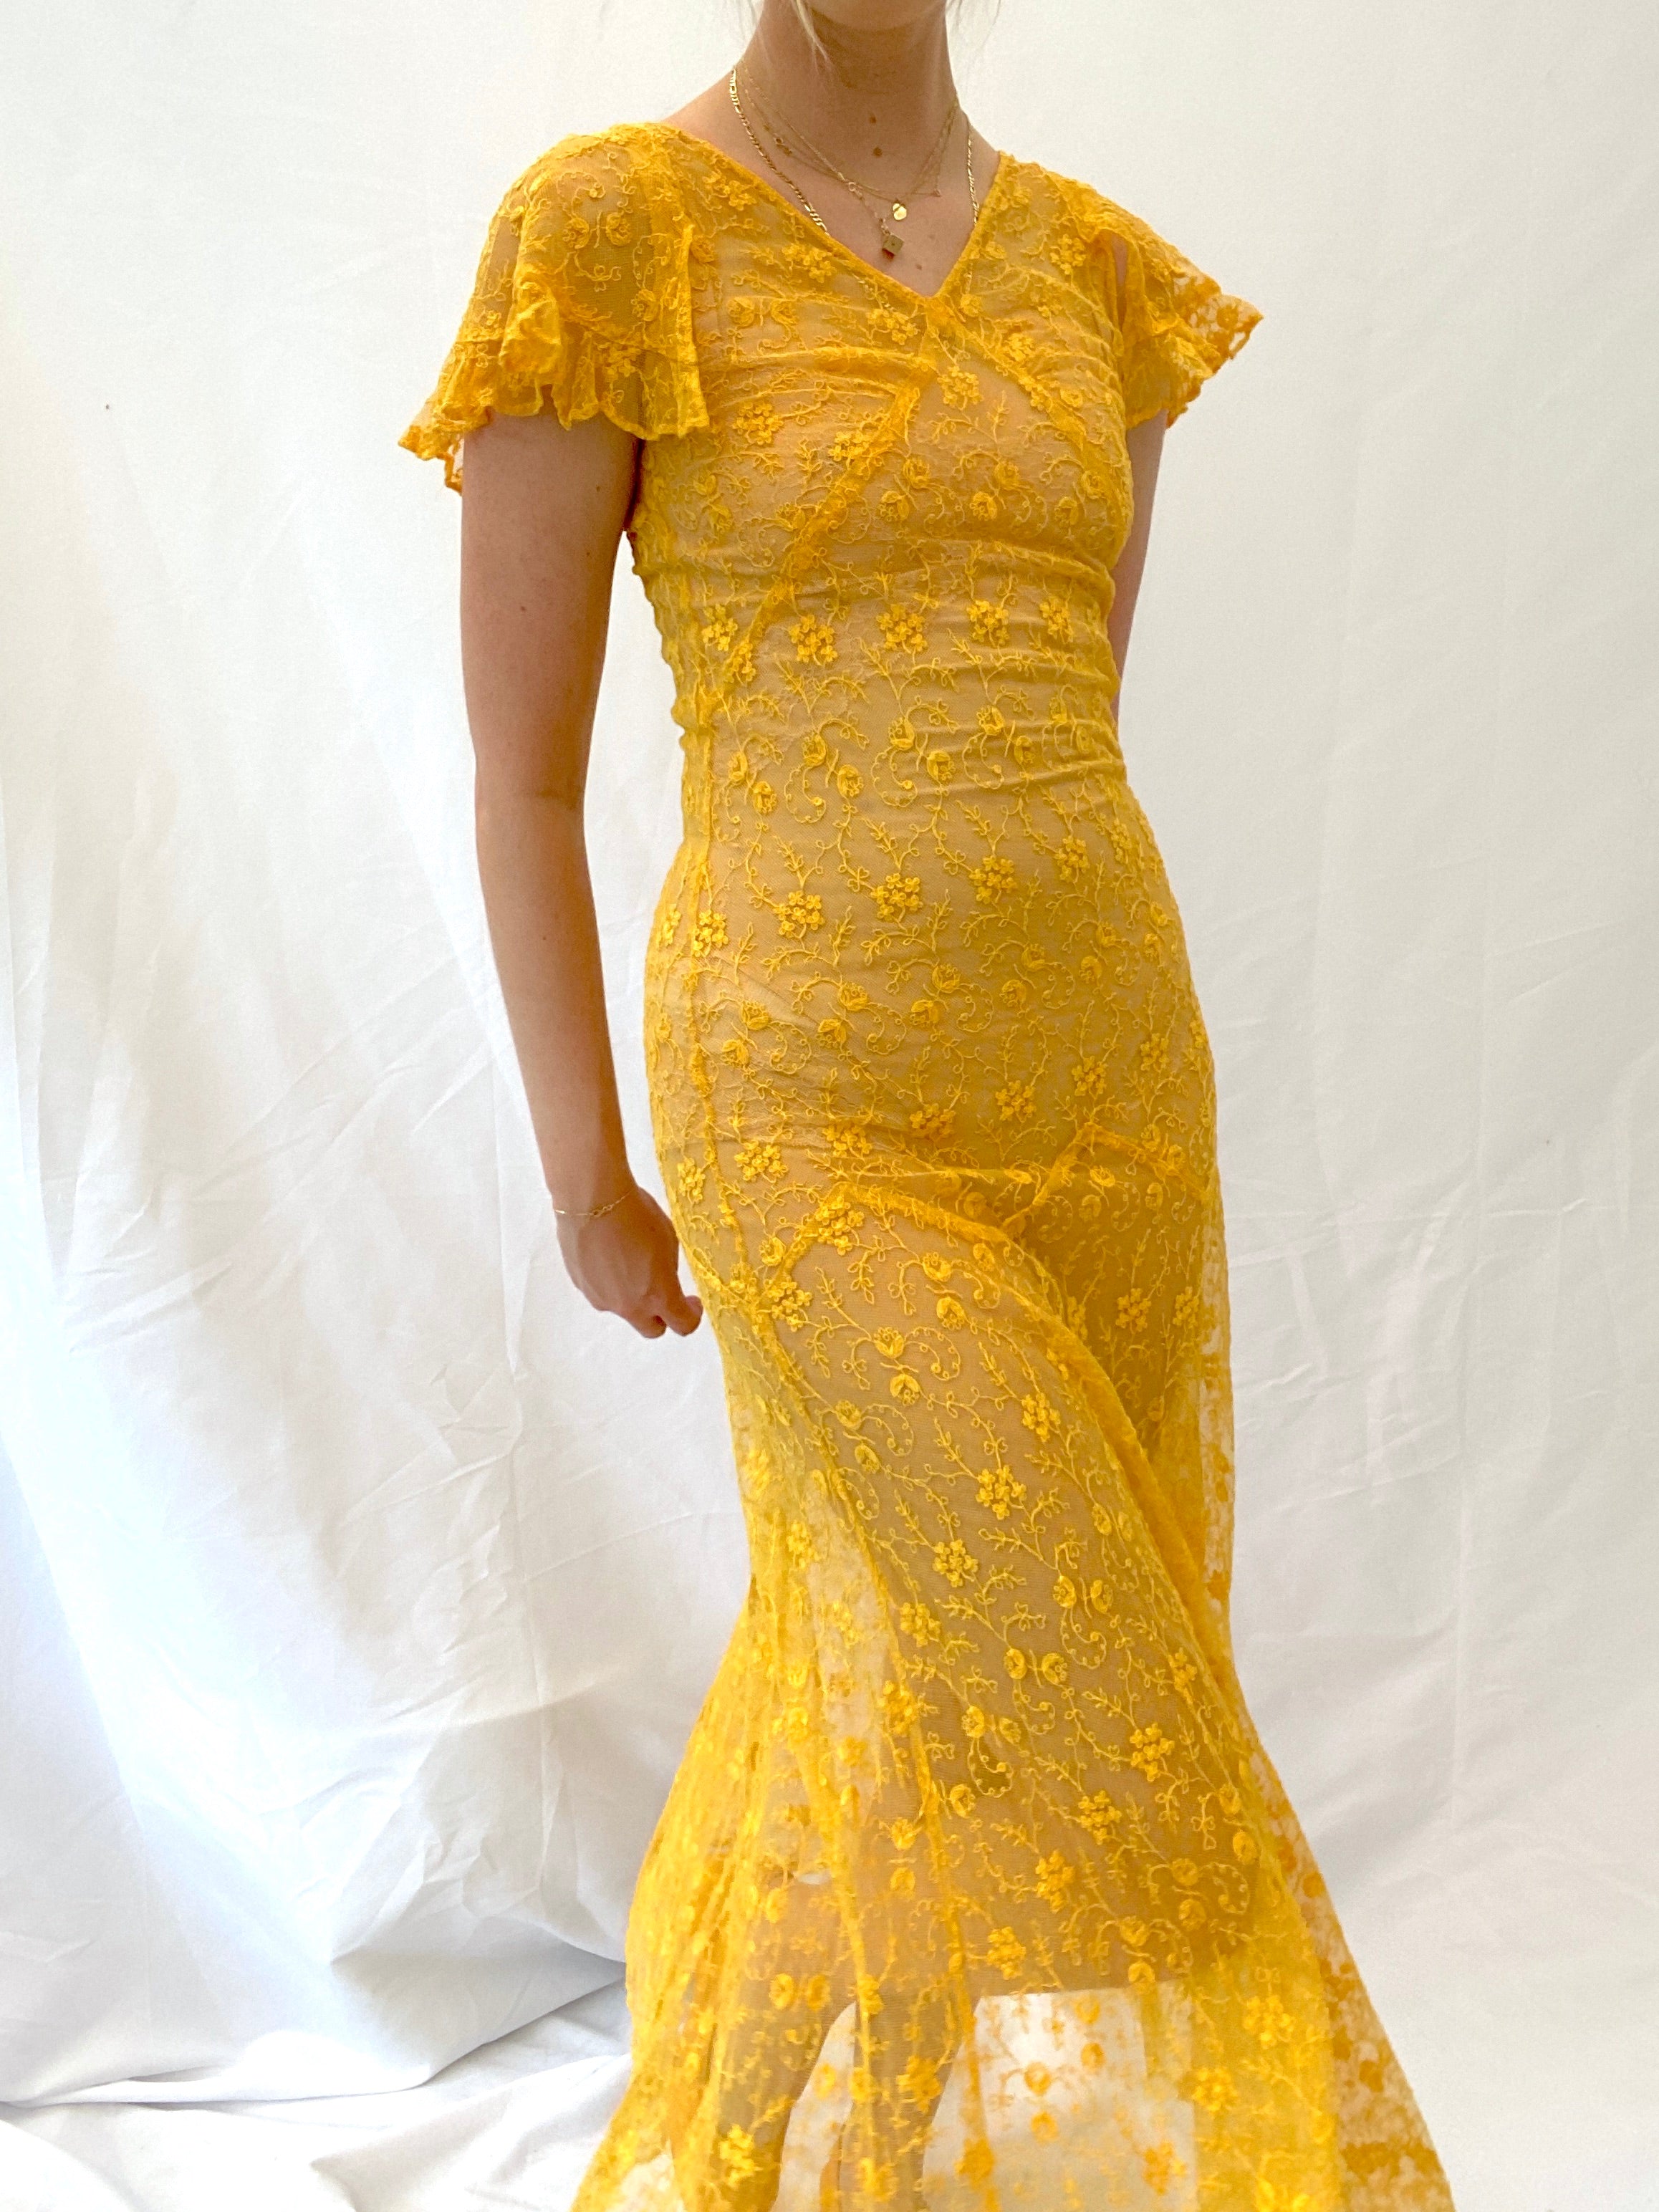 Hand Dyed Orange 1930's Embroidered Net Lace Dress